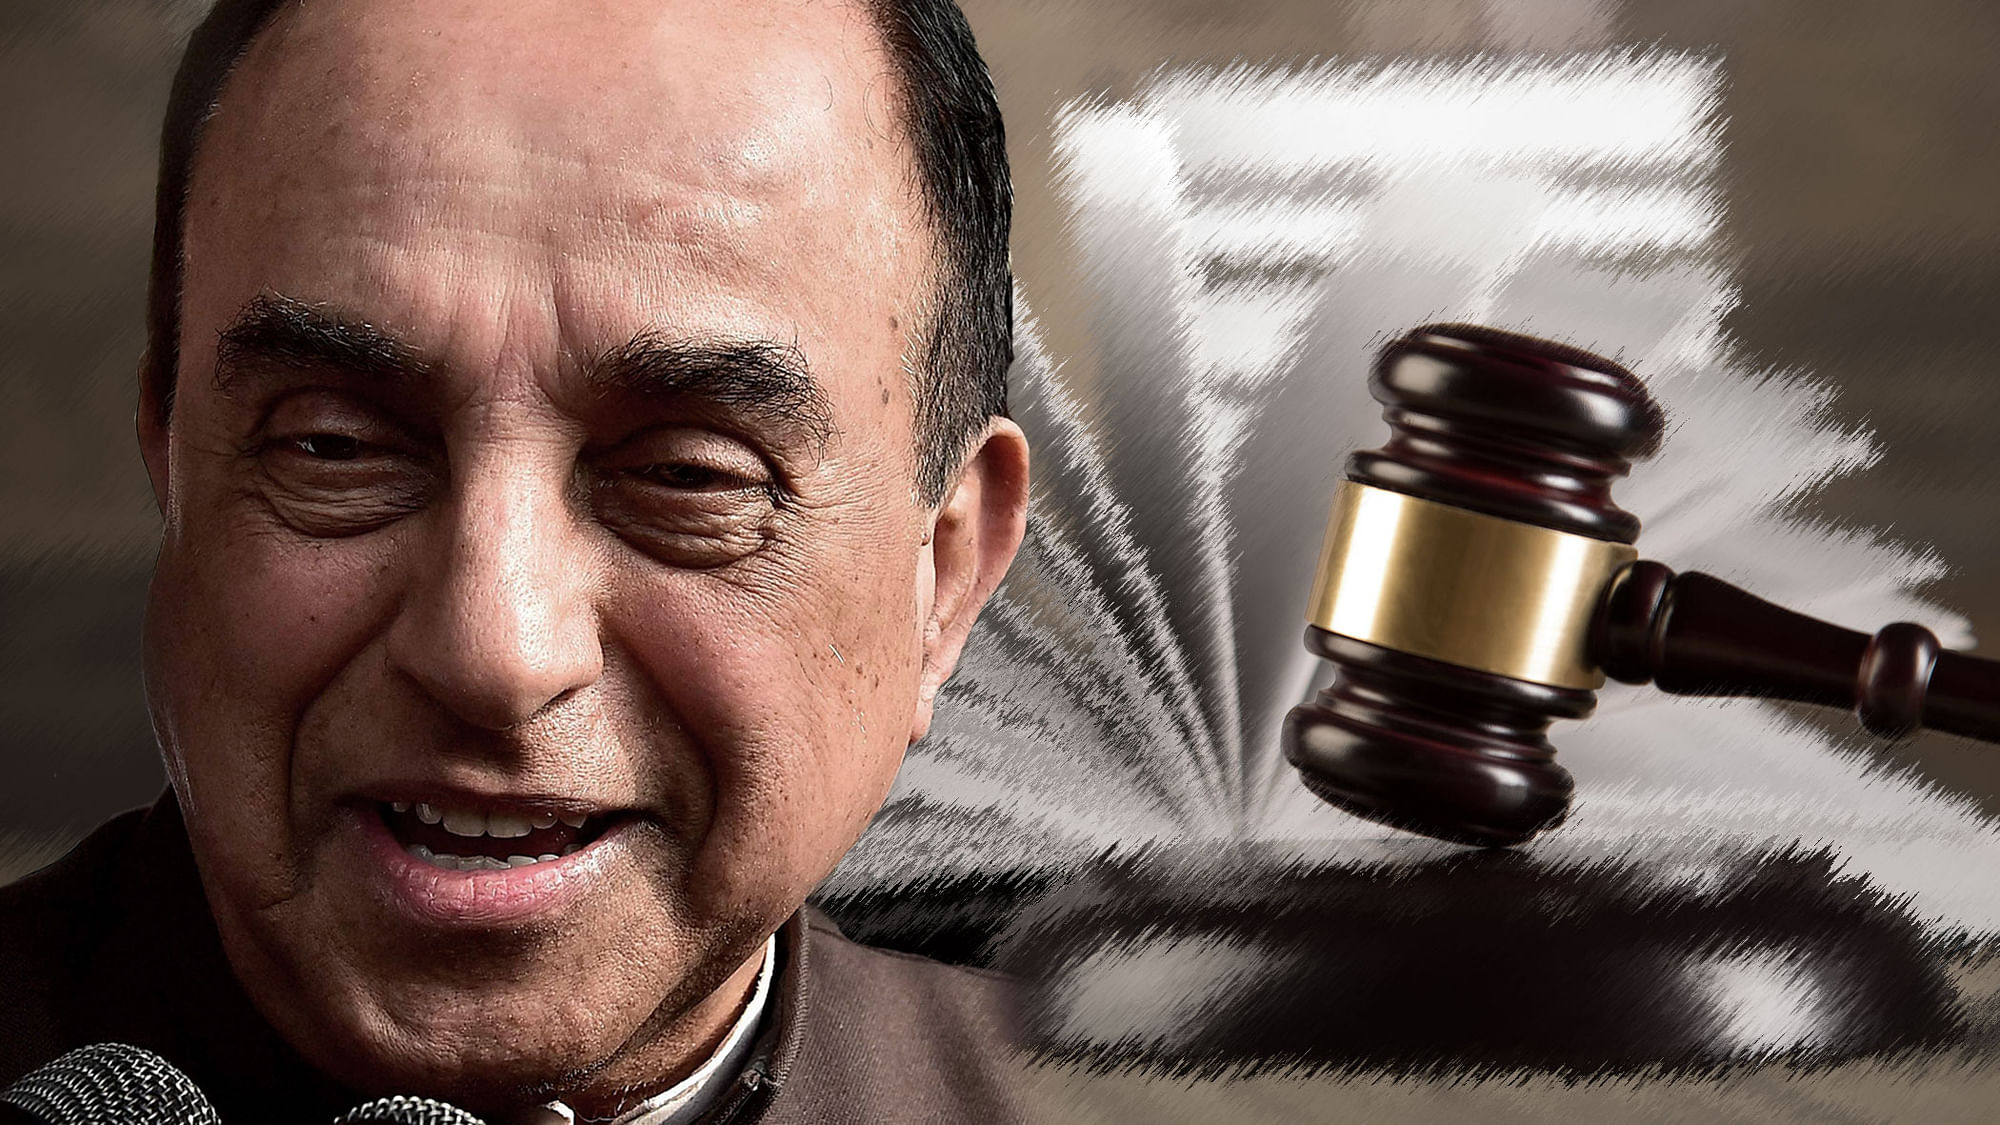 BJP Leader Subramanian Swamy. (Photo: <a href="http://www.thequint.com/">The Quint</a>)